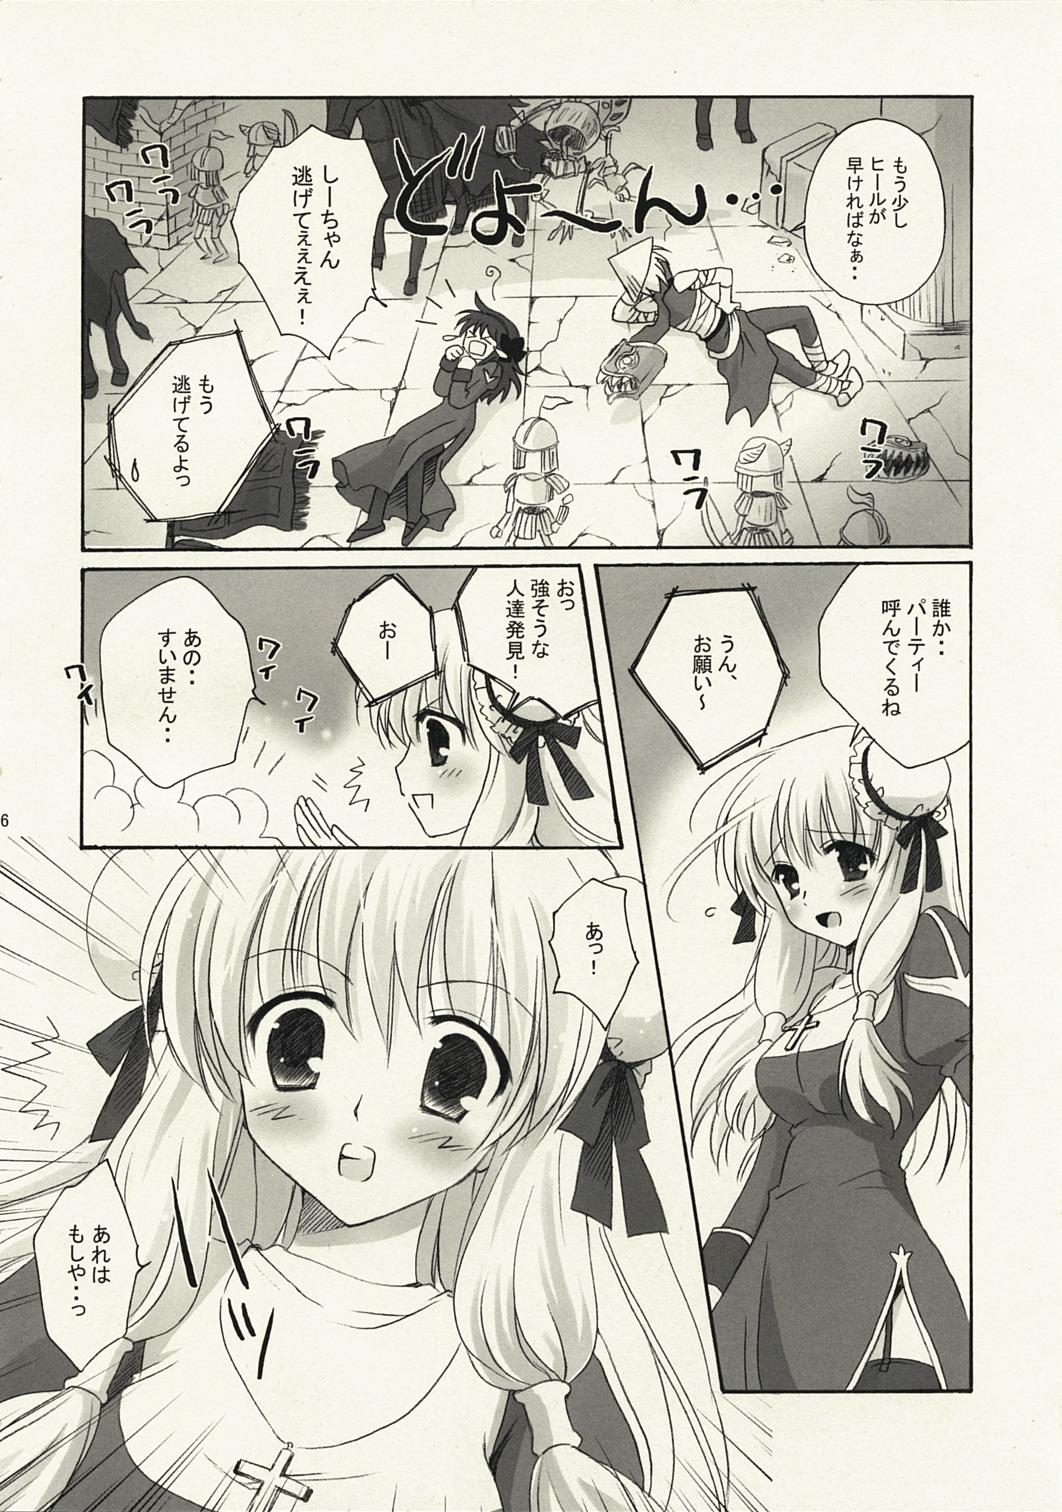 Stepbrother Gloriosa e Youkoso @ Shi-chan - Ragnarok online Best Blowjobs Ever - Page 5